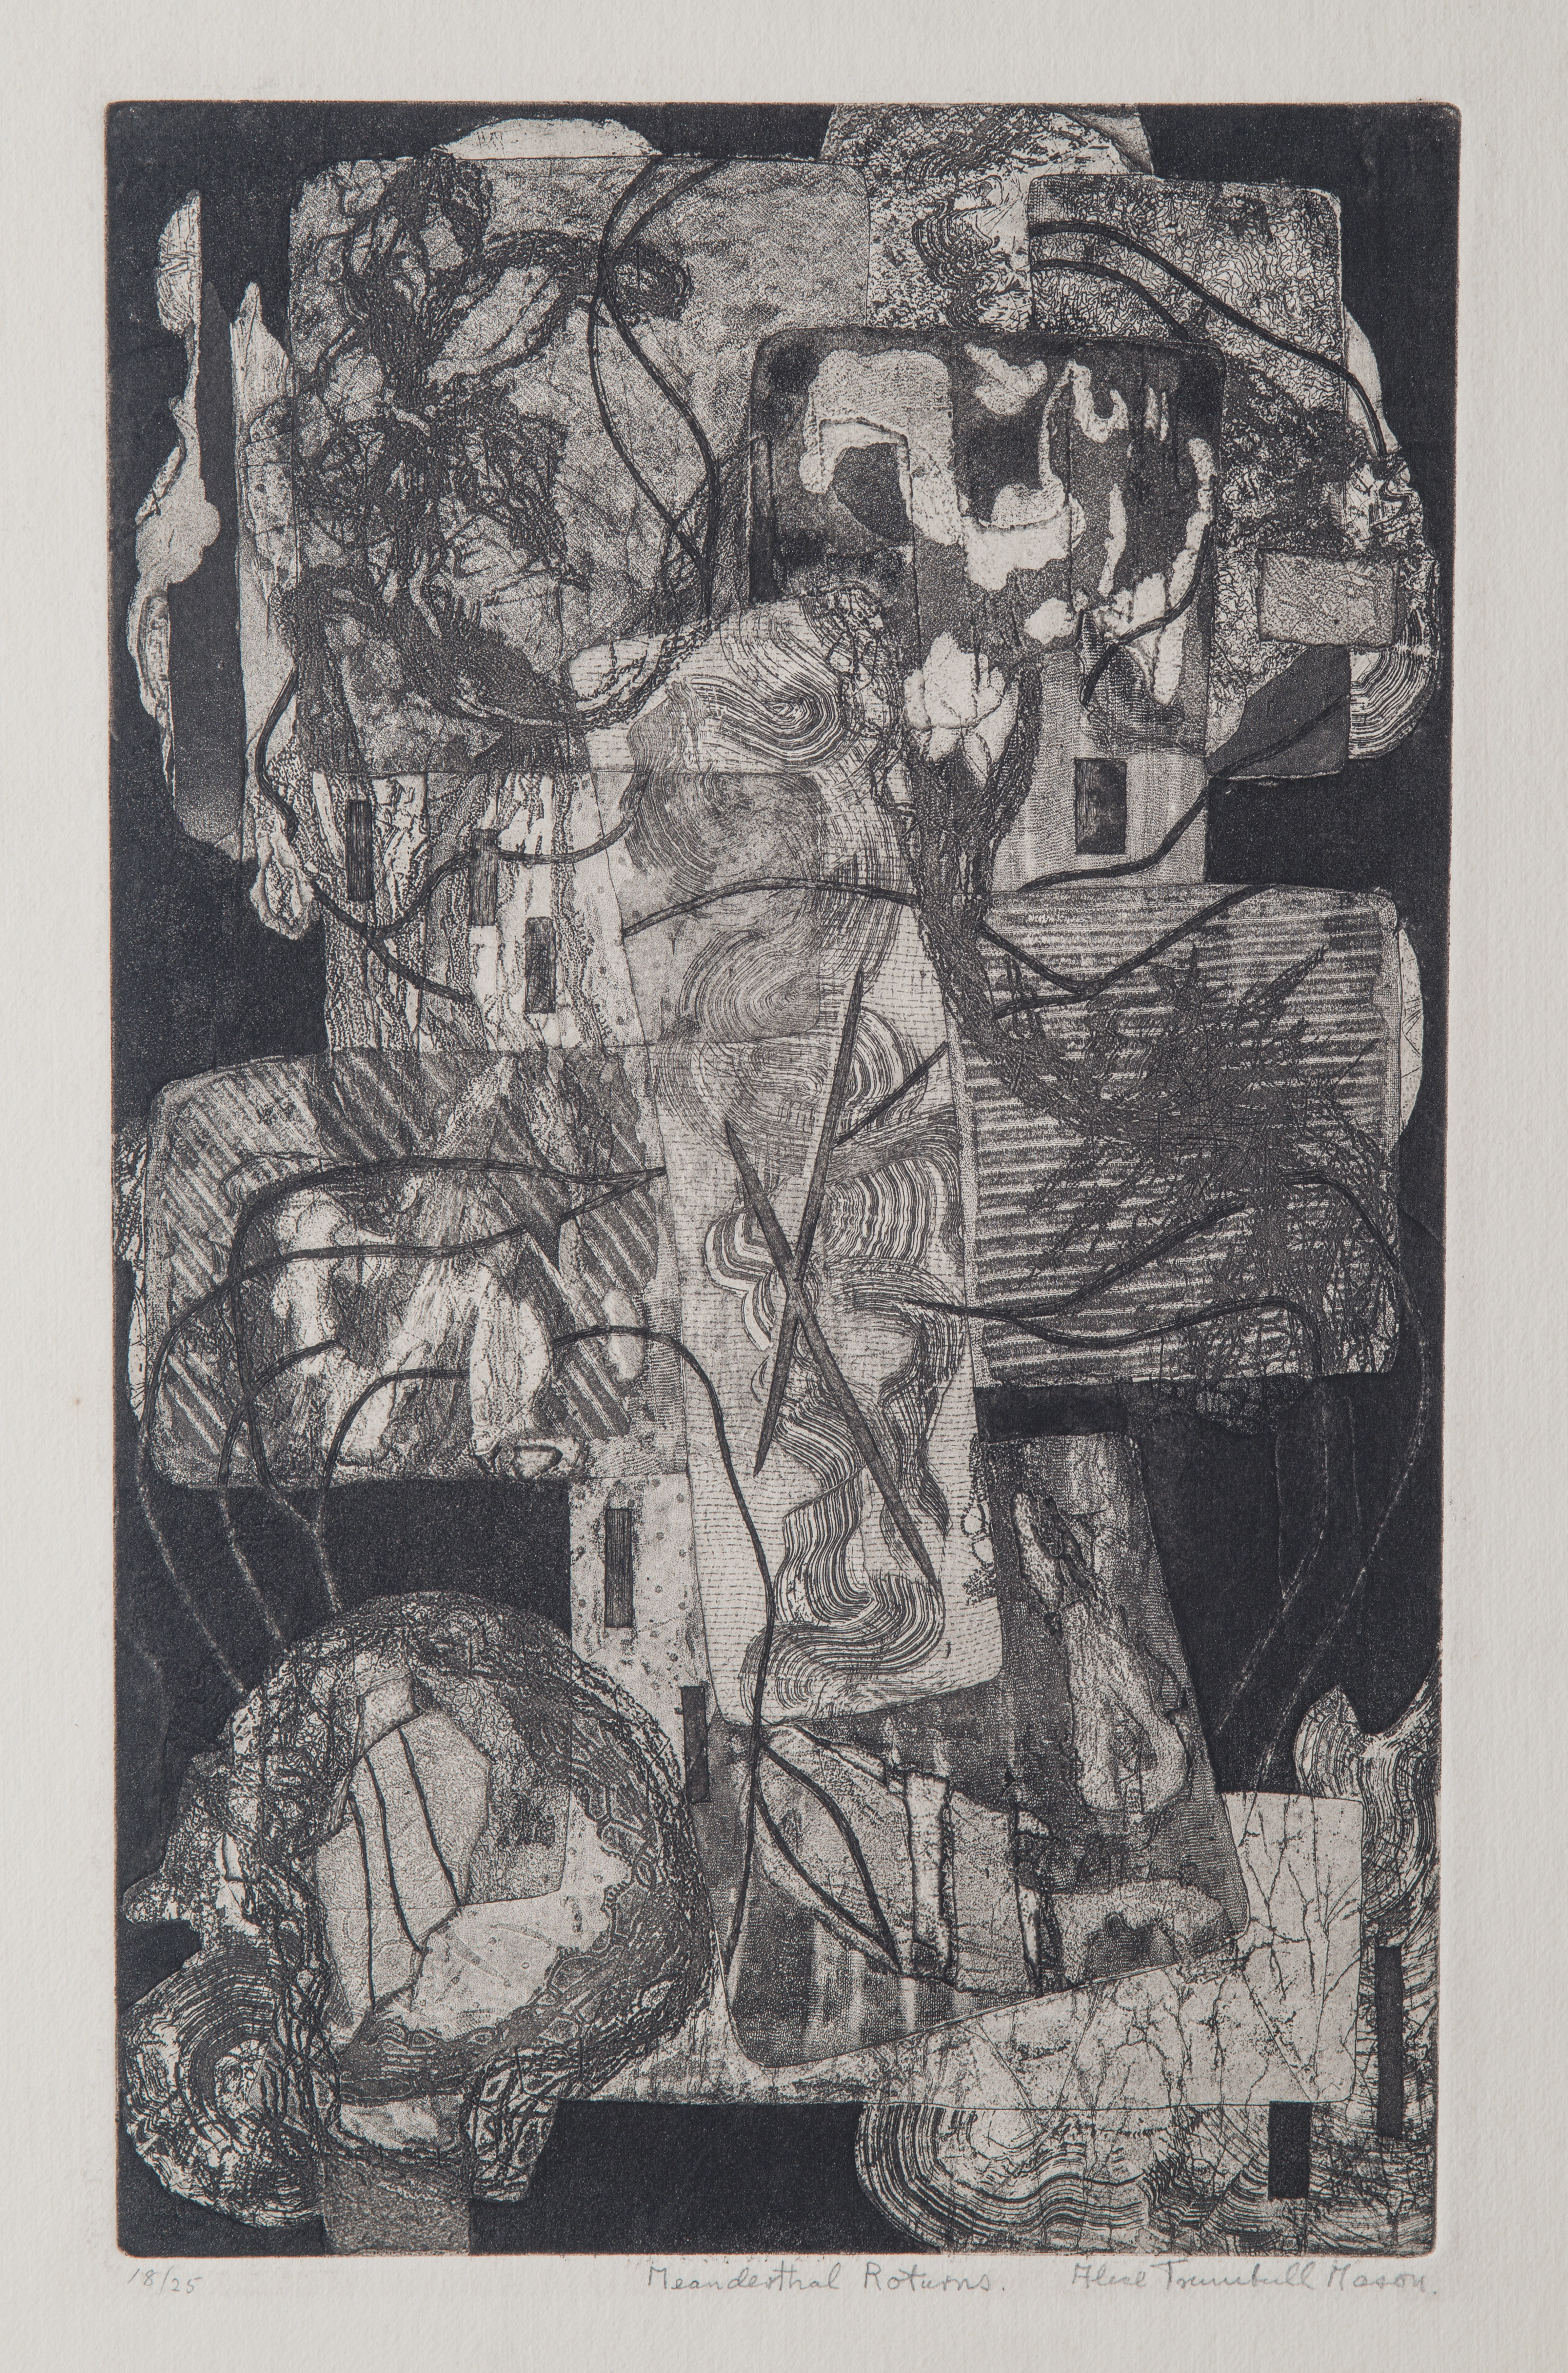 Abstract print on paper, comprised of biomorphic forms and lines. The lines have varying grey tones and are net-like, mimicking the texture of fabric.